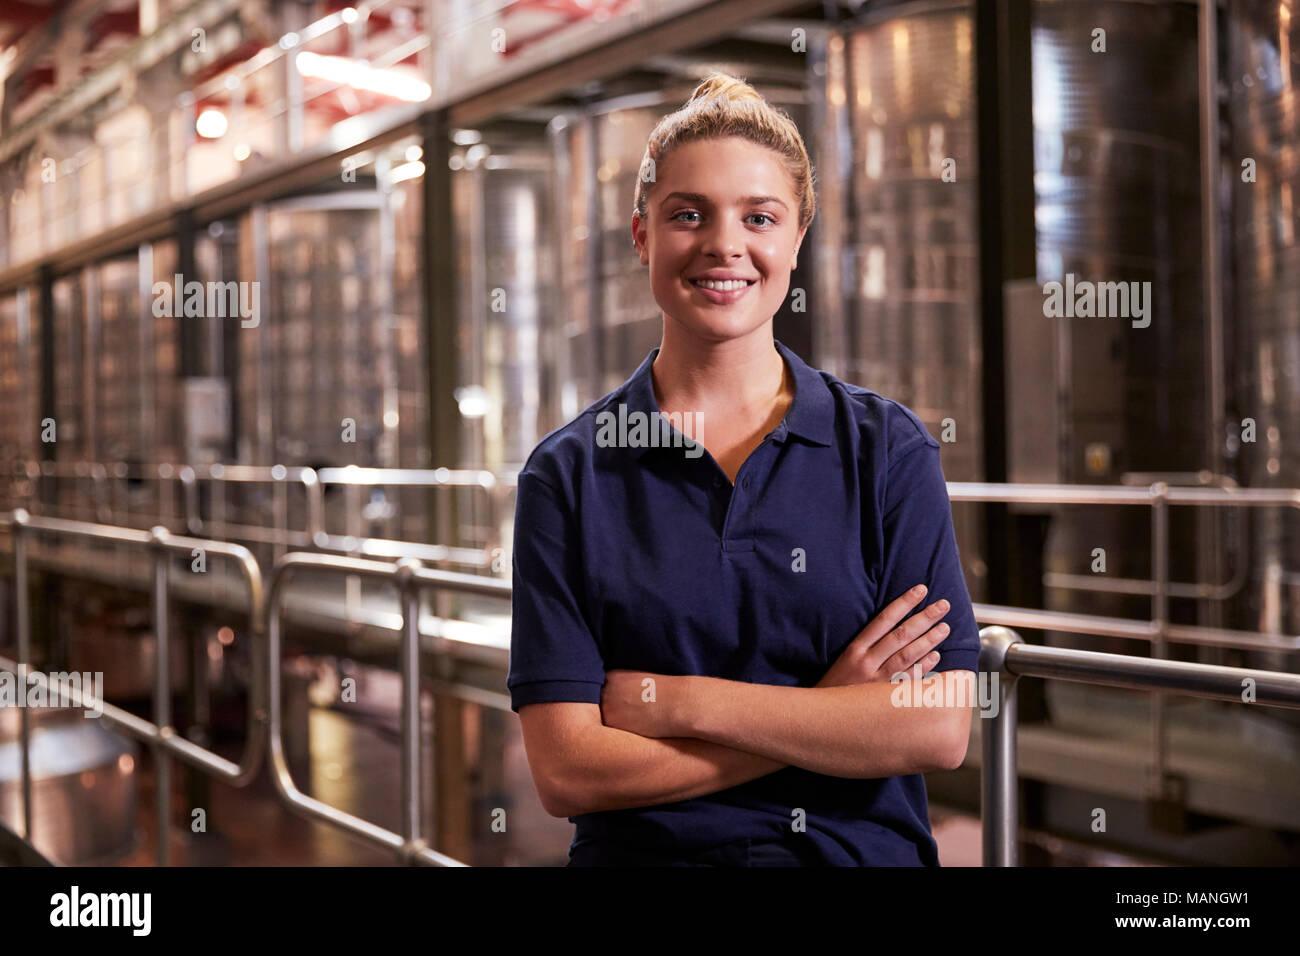 Portrait of a young white woman working at a wine factory Stock Photo